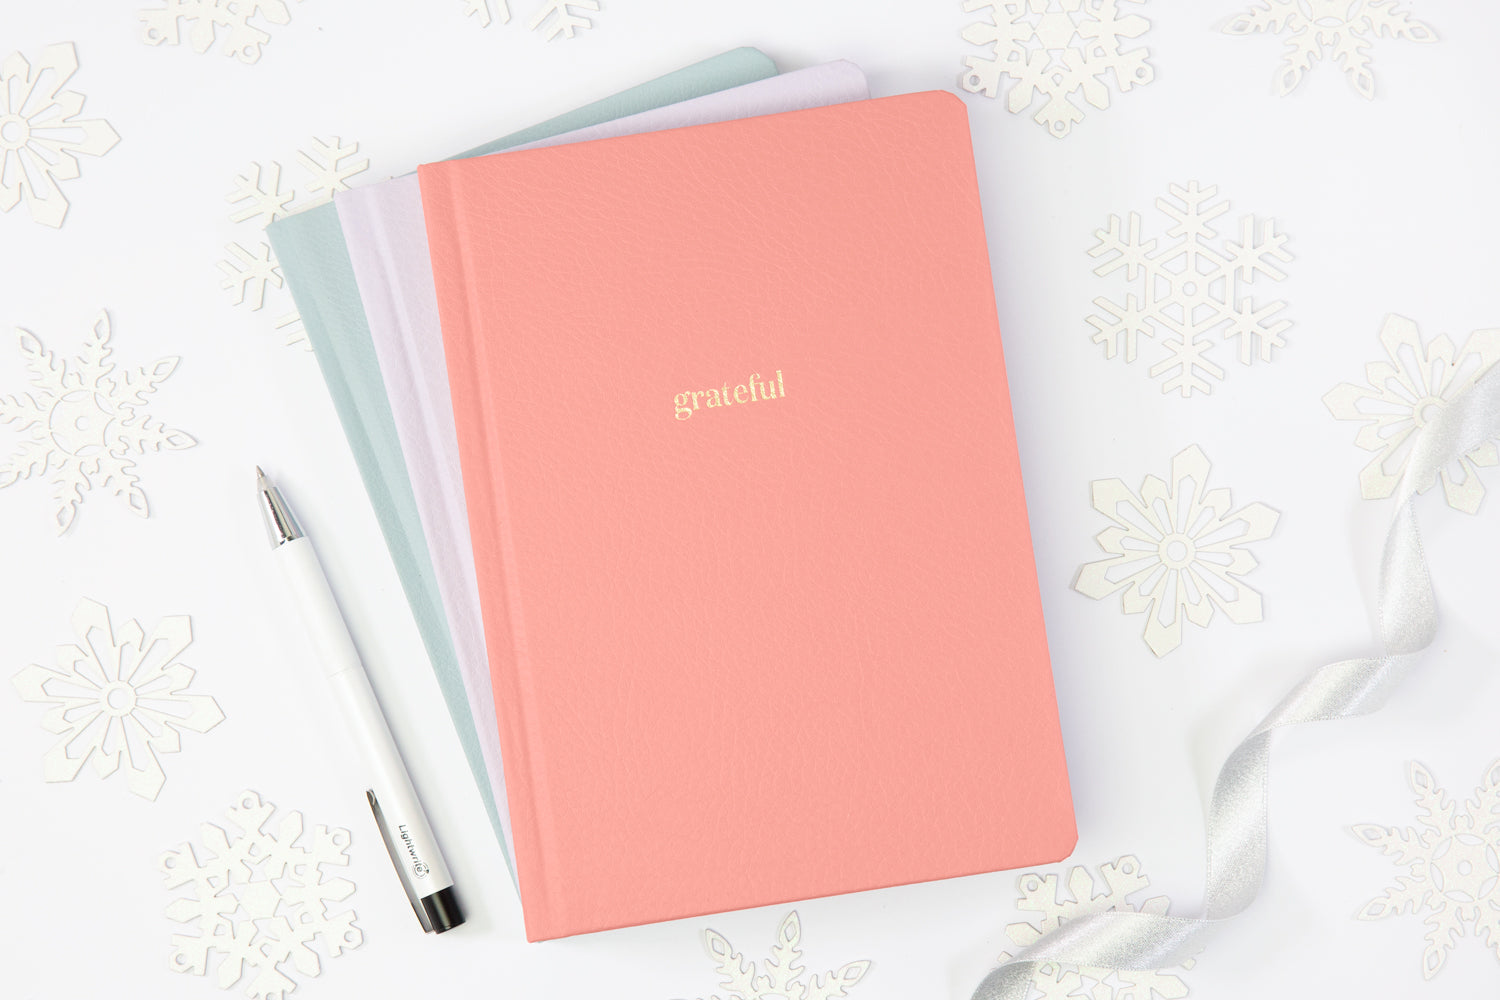 A stack of pink, blue, and lavender gratitude journals on a white table, with a white pen.